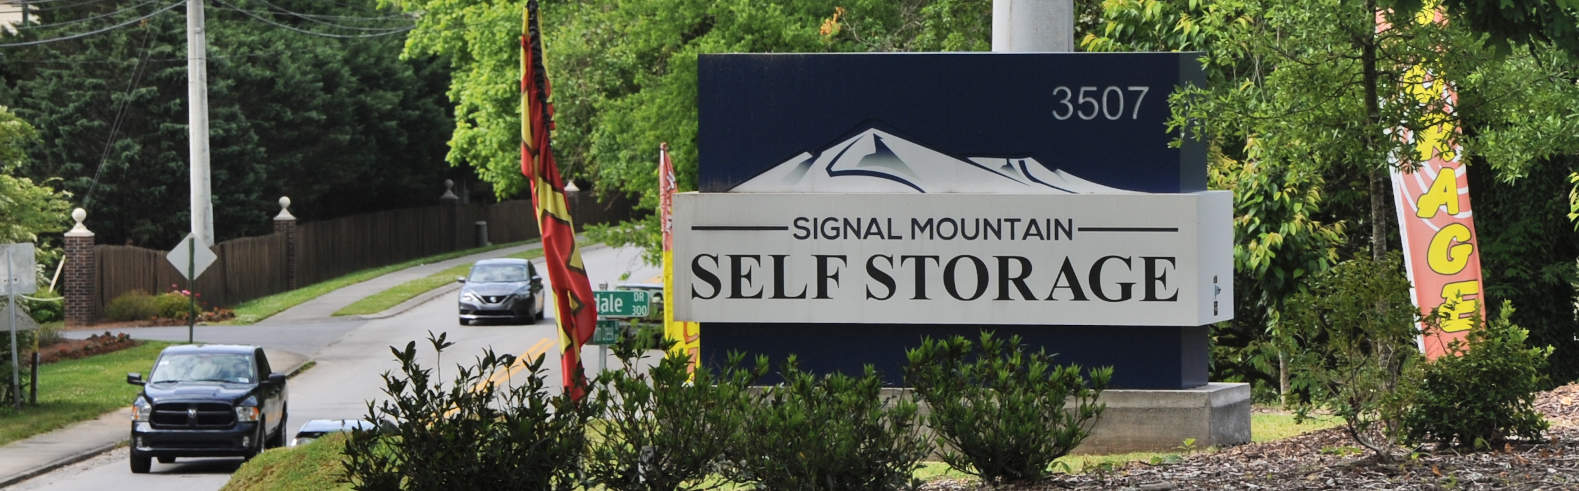 Signal Mountain Self Storage Sign in Chattanooga, TN